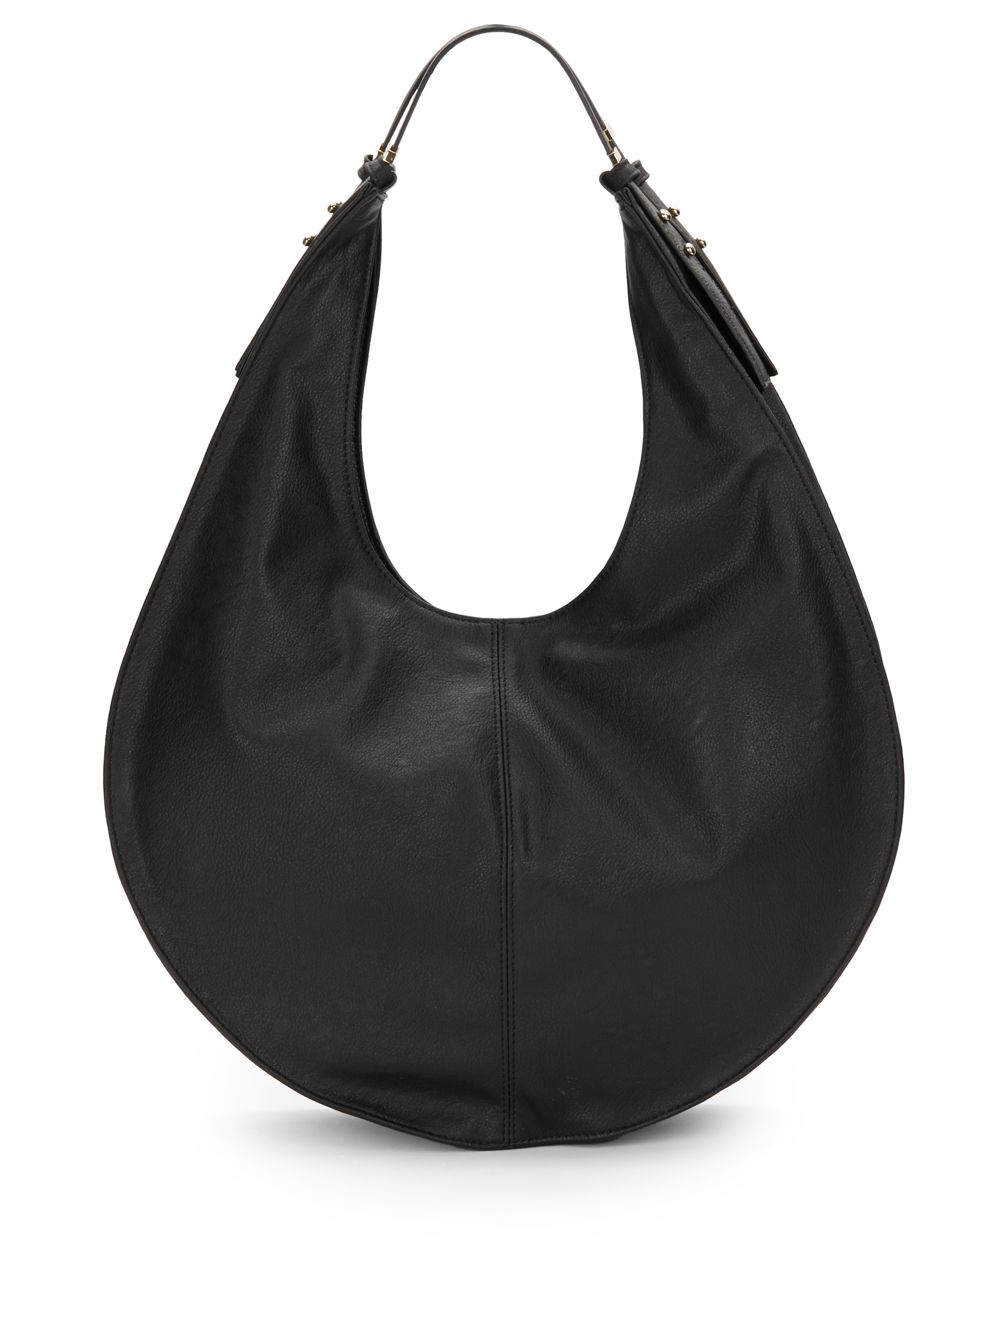 Faux Leather Hobo Bag Amazon Confederated Tribes Of The Umatilla Indian Reservation - supreme hobo roblox